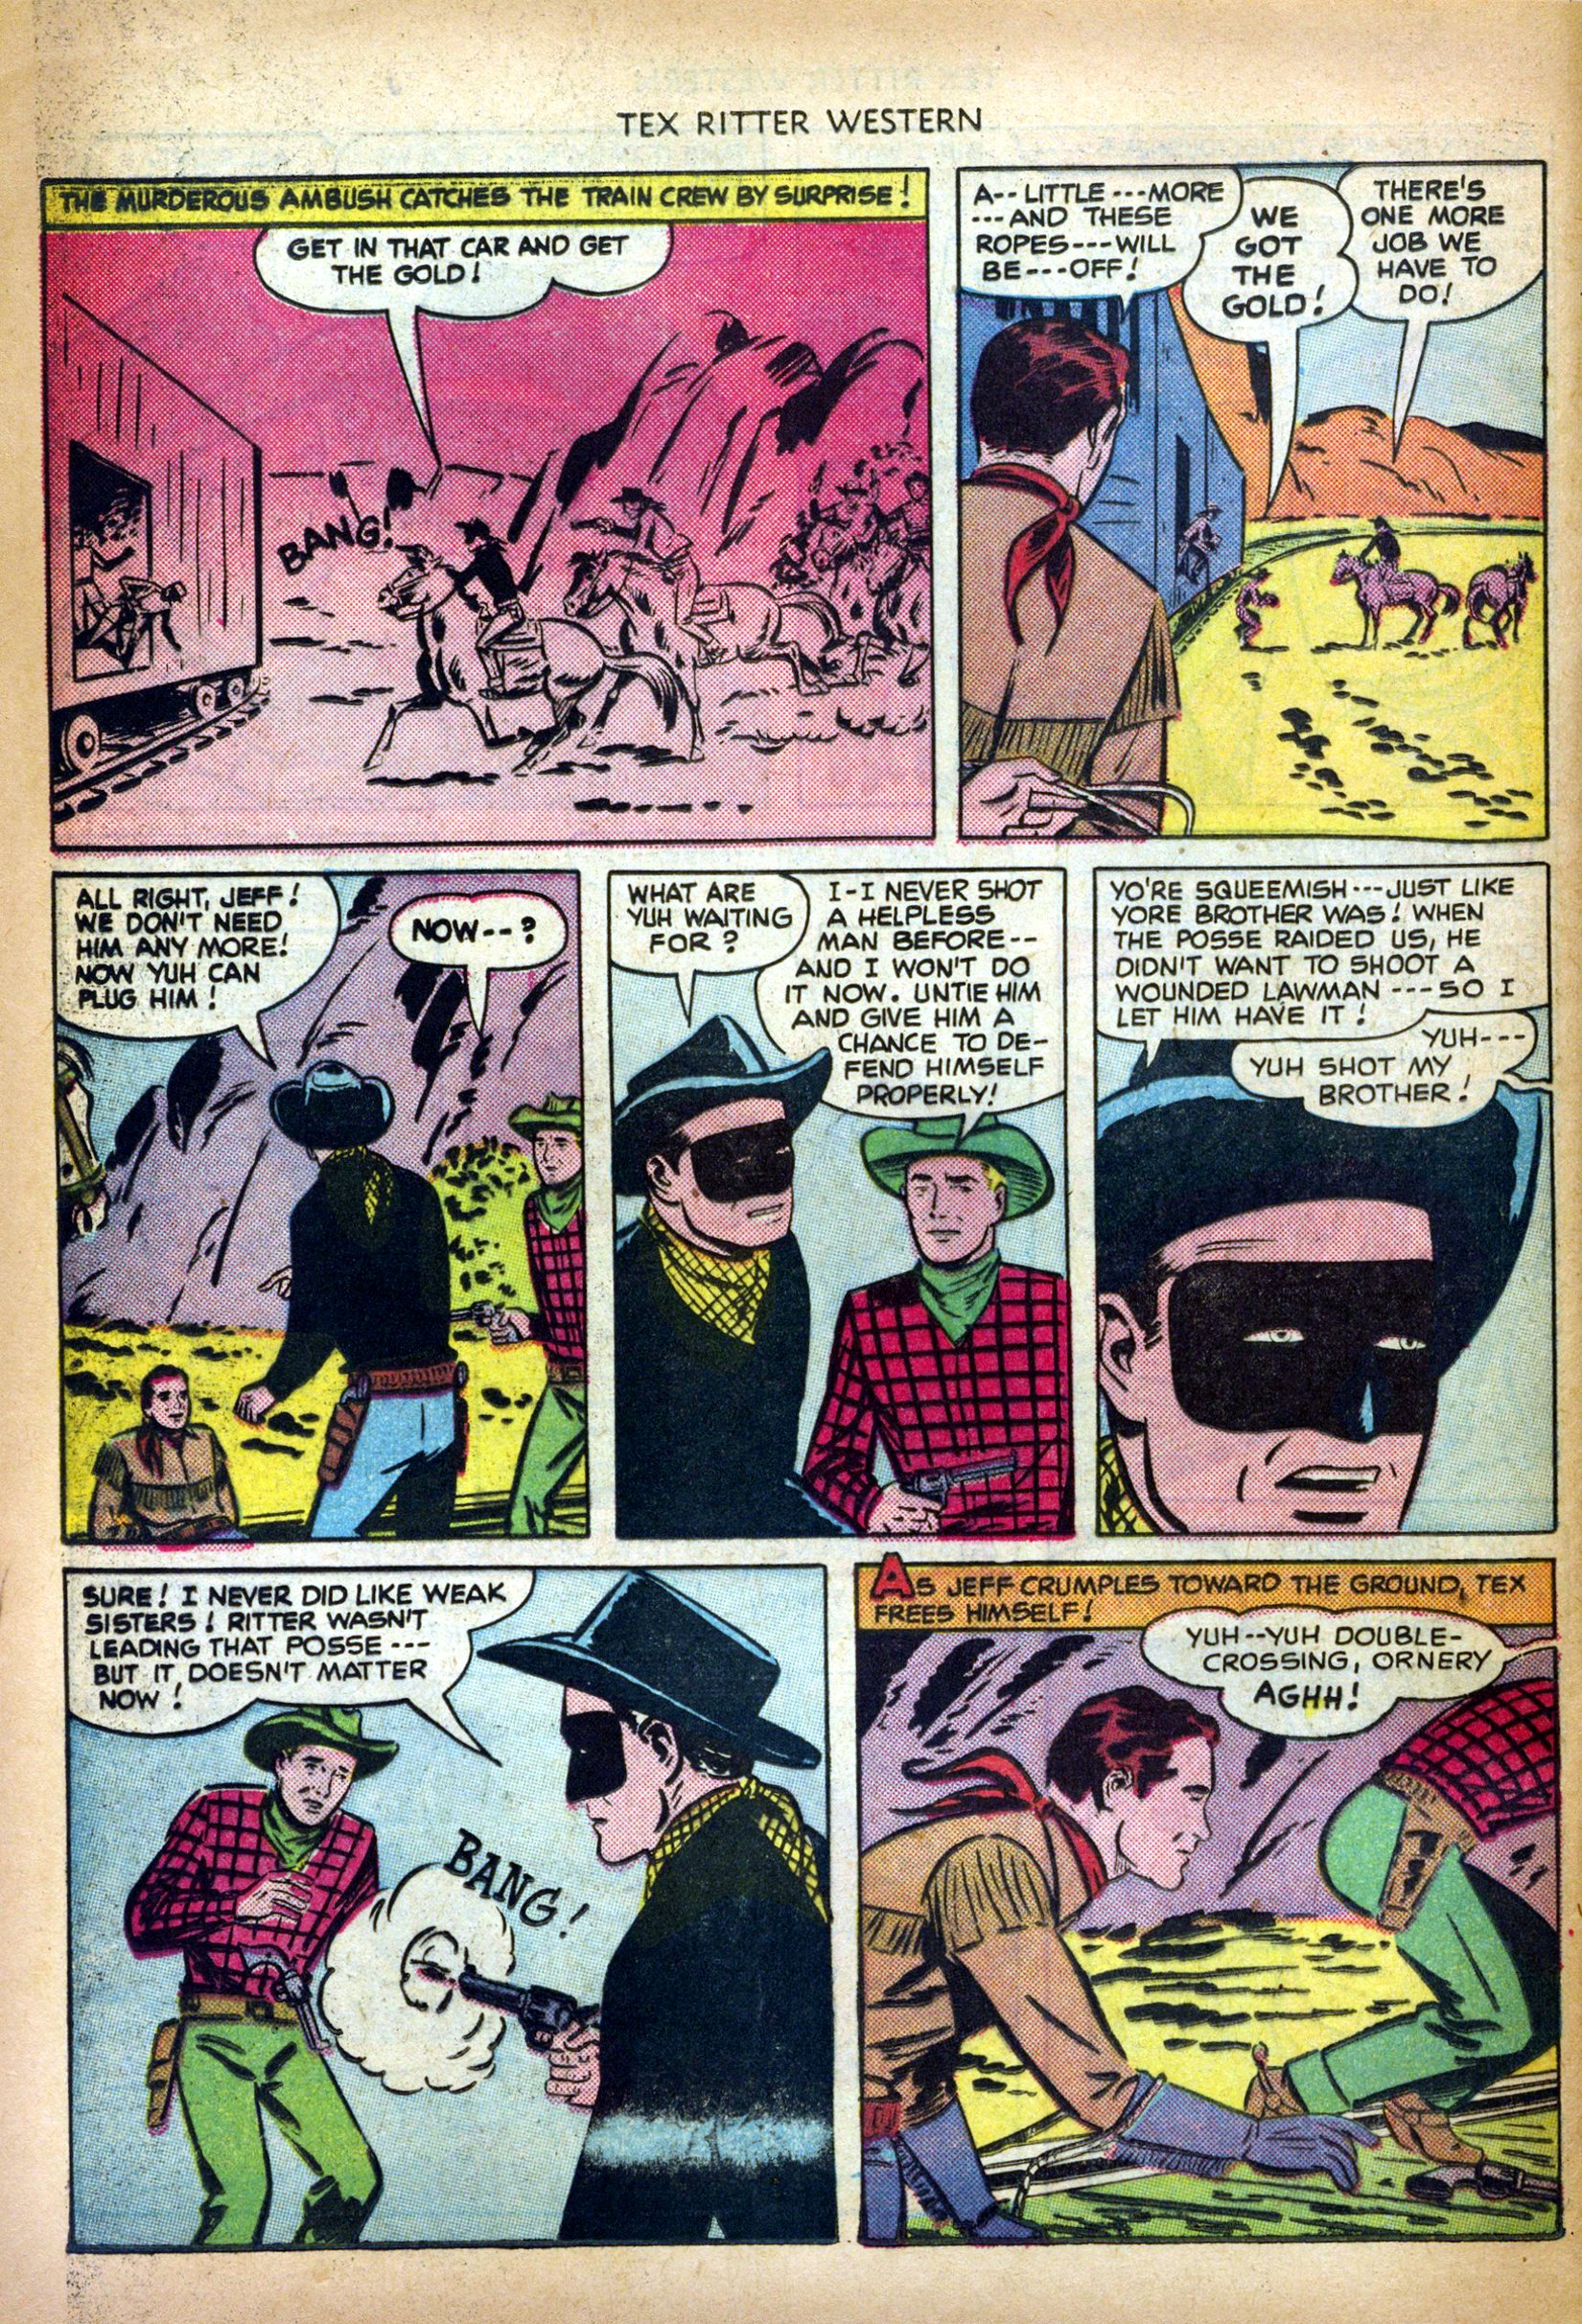 Read online Tex Ritter Western comic -  Issue #6 - 28